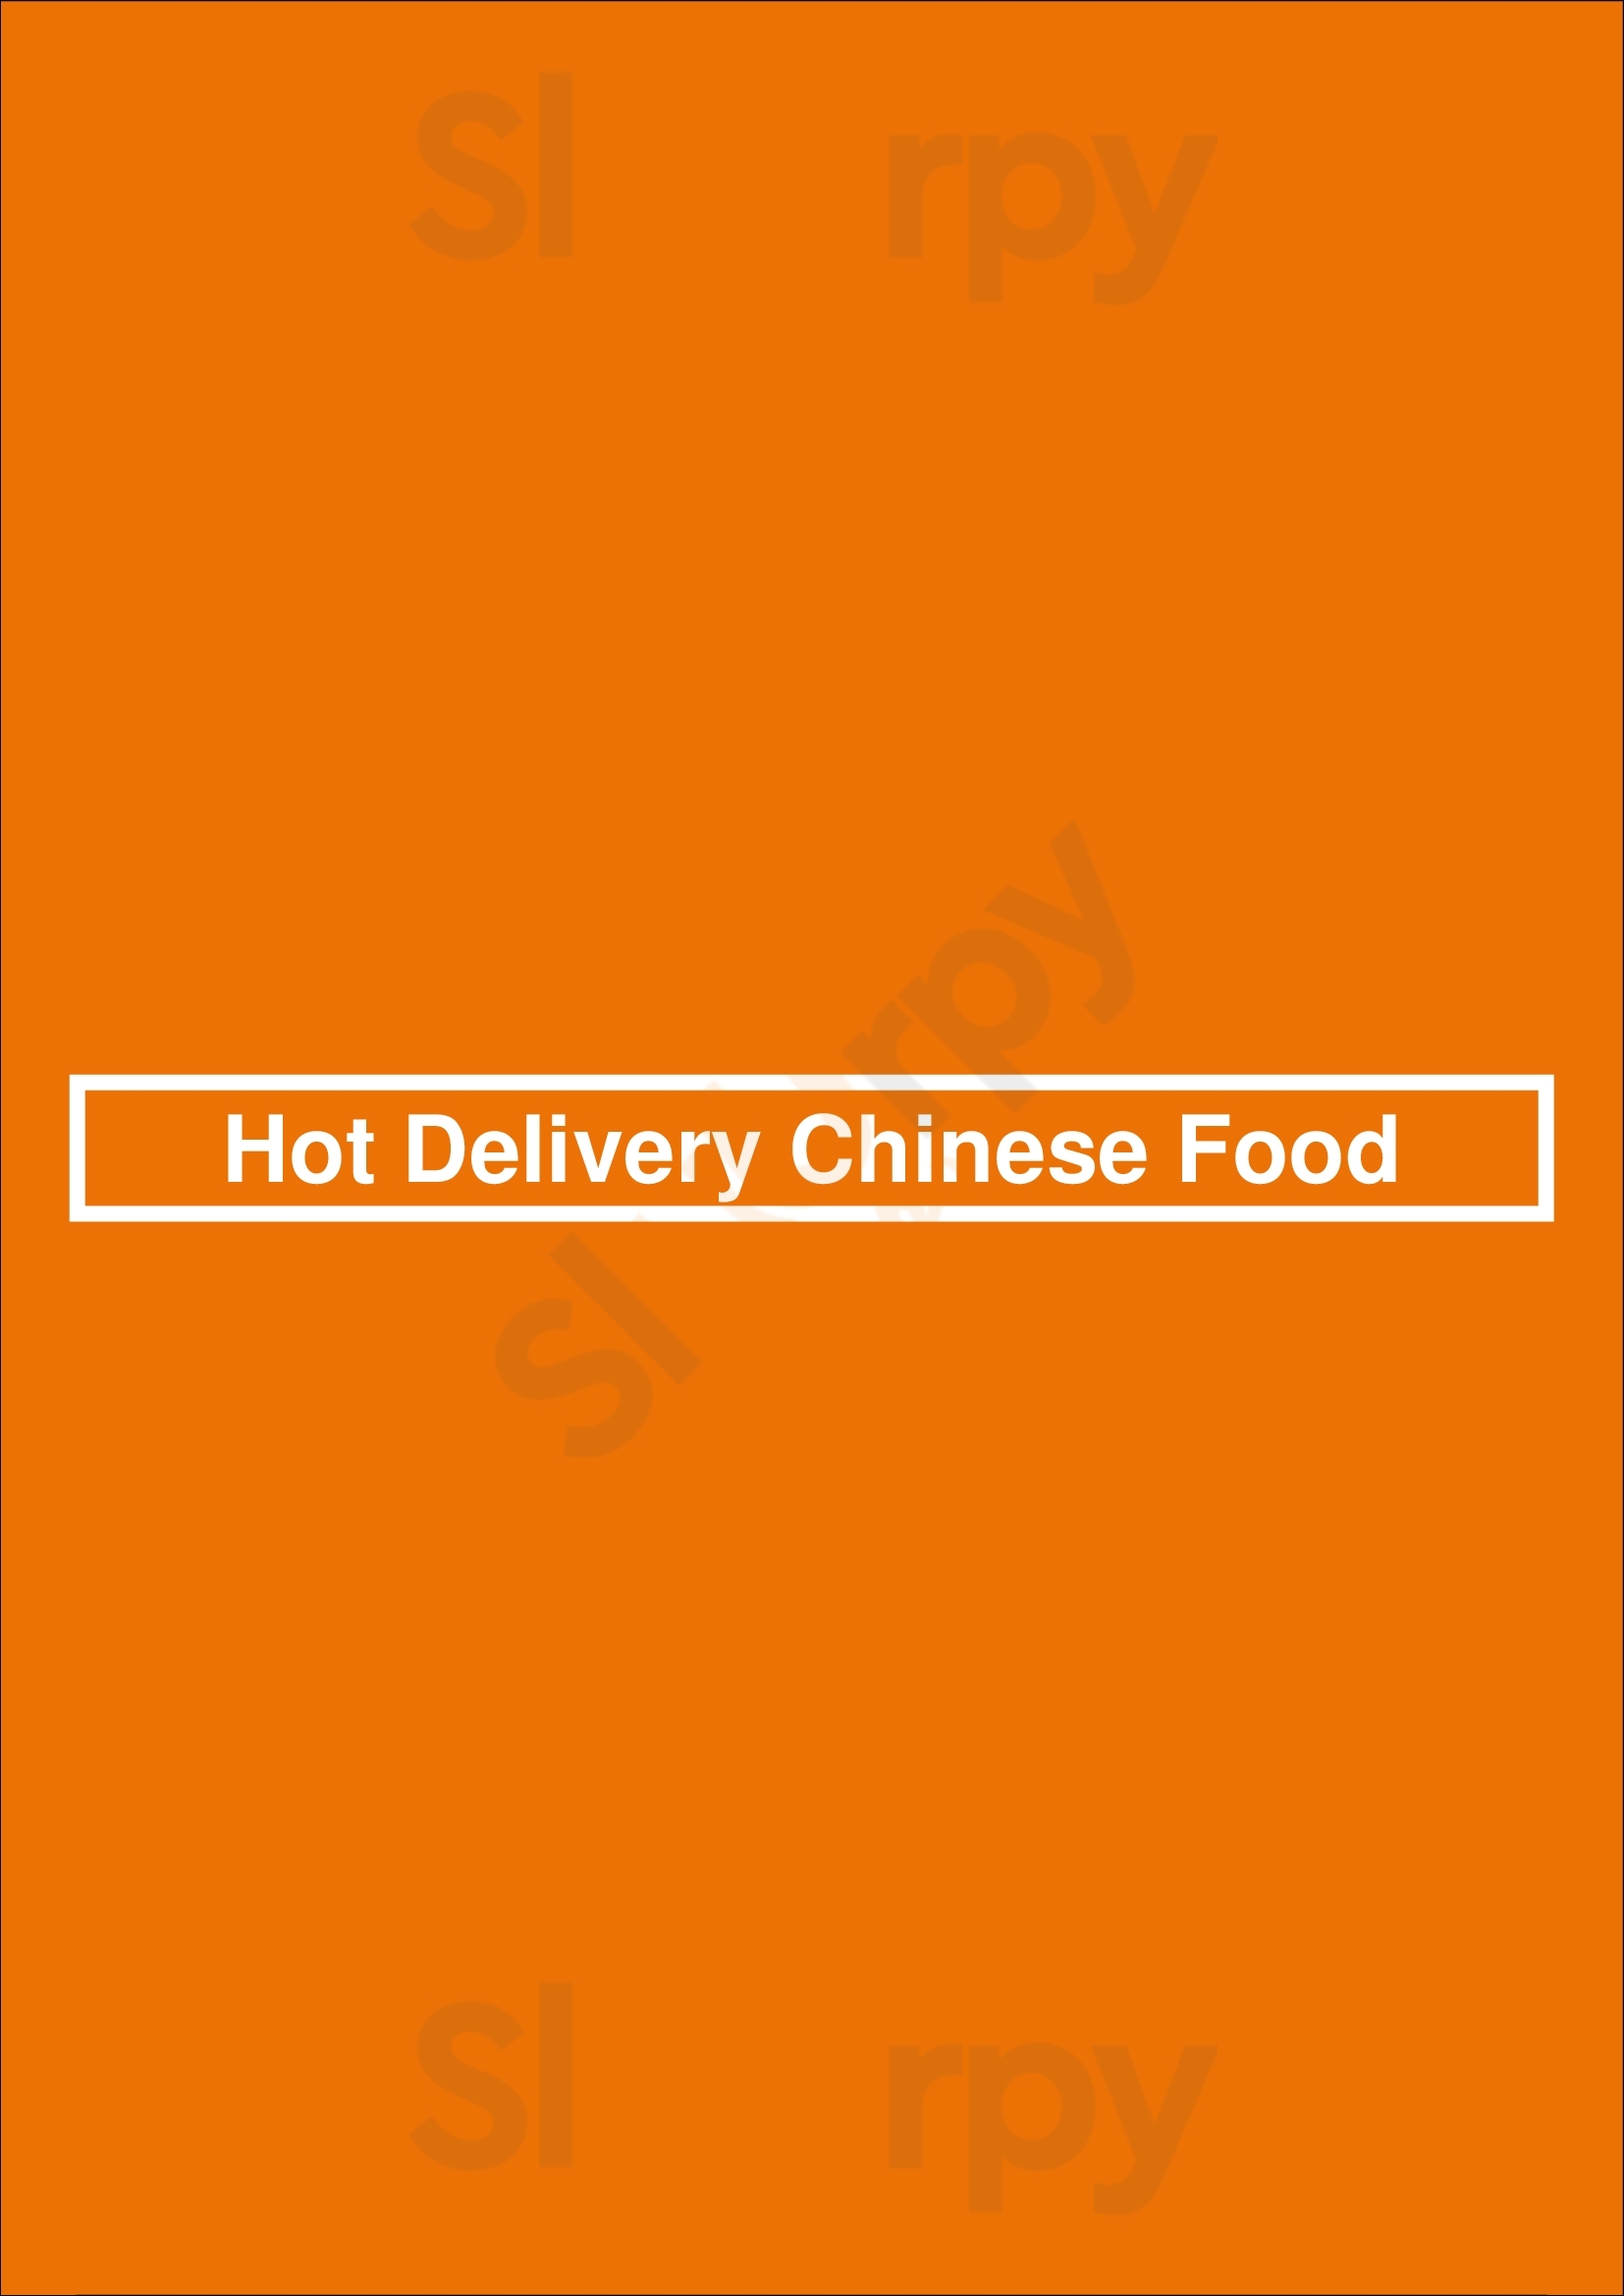 Hot Delivery Chinese Food Vancouver Menu - 1